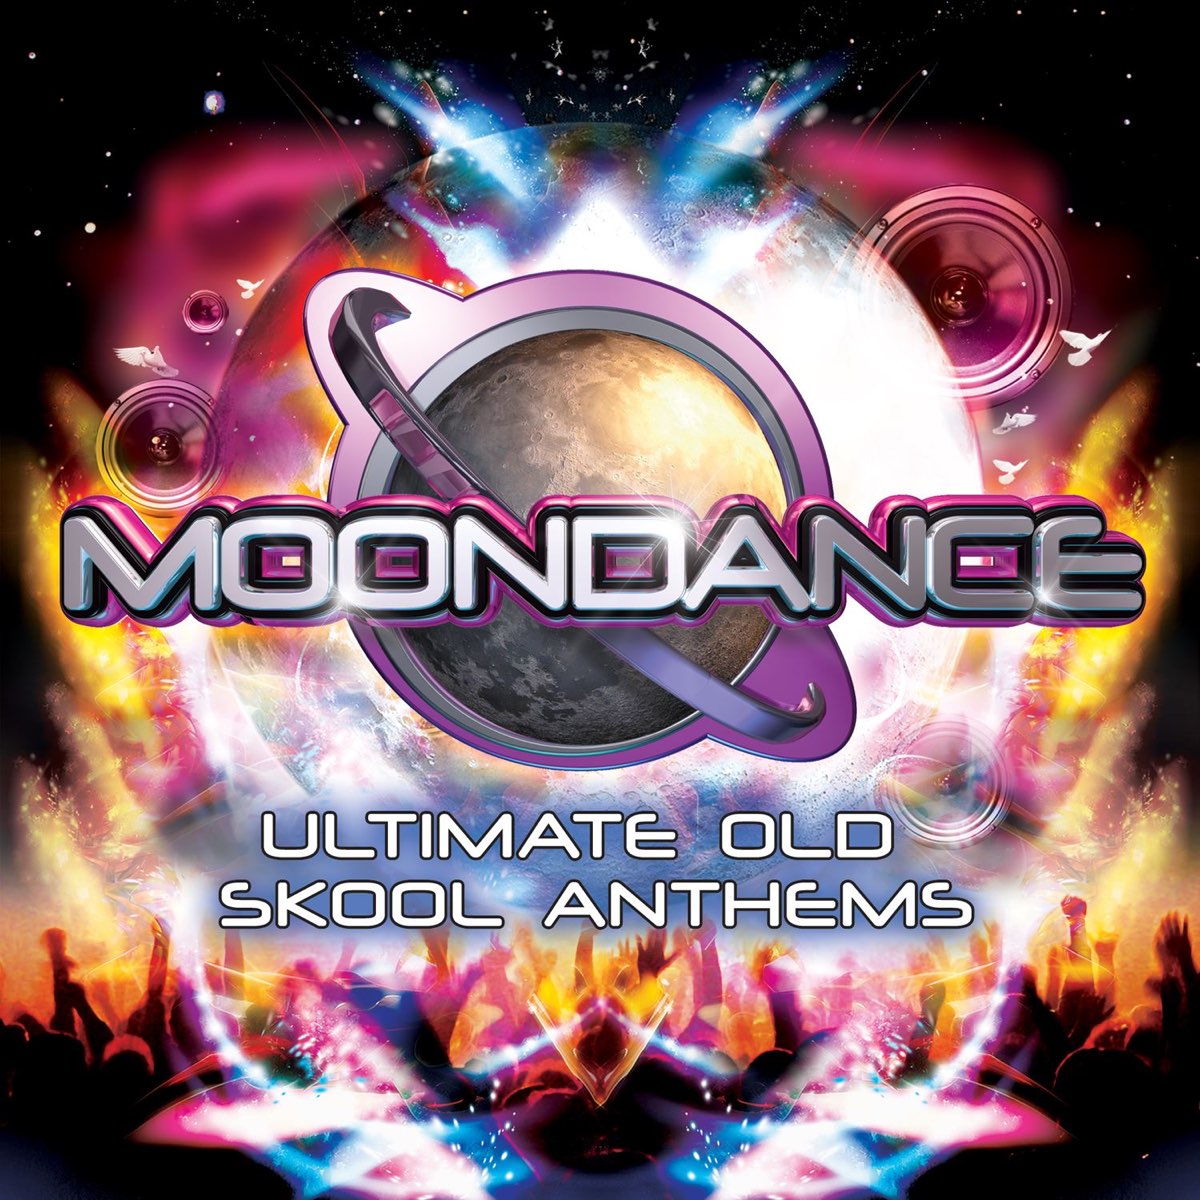 Moondance - Ultimate Old Skool Anthems by Various Artists on Apple Music